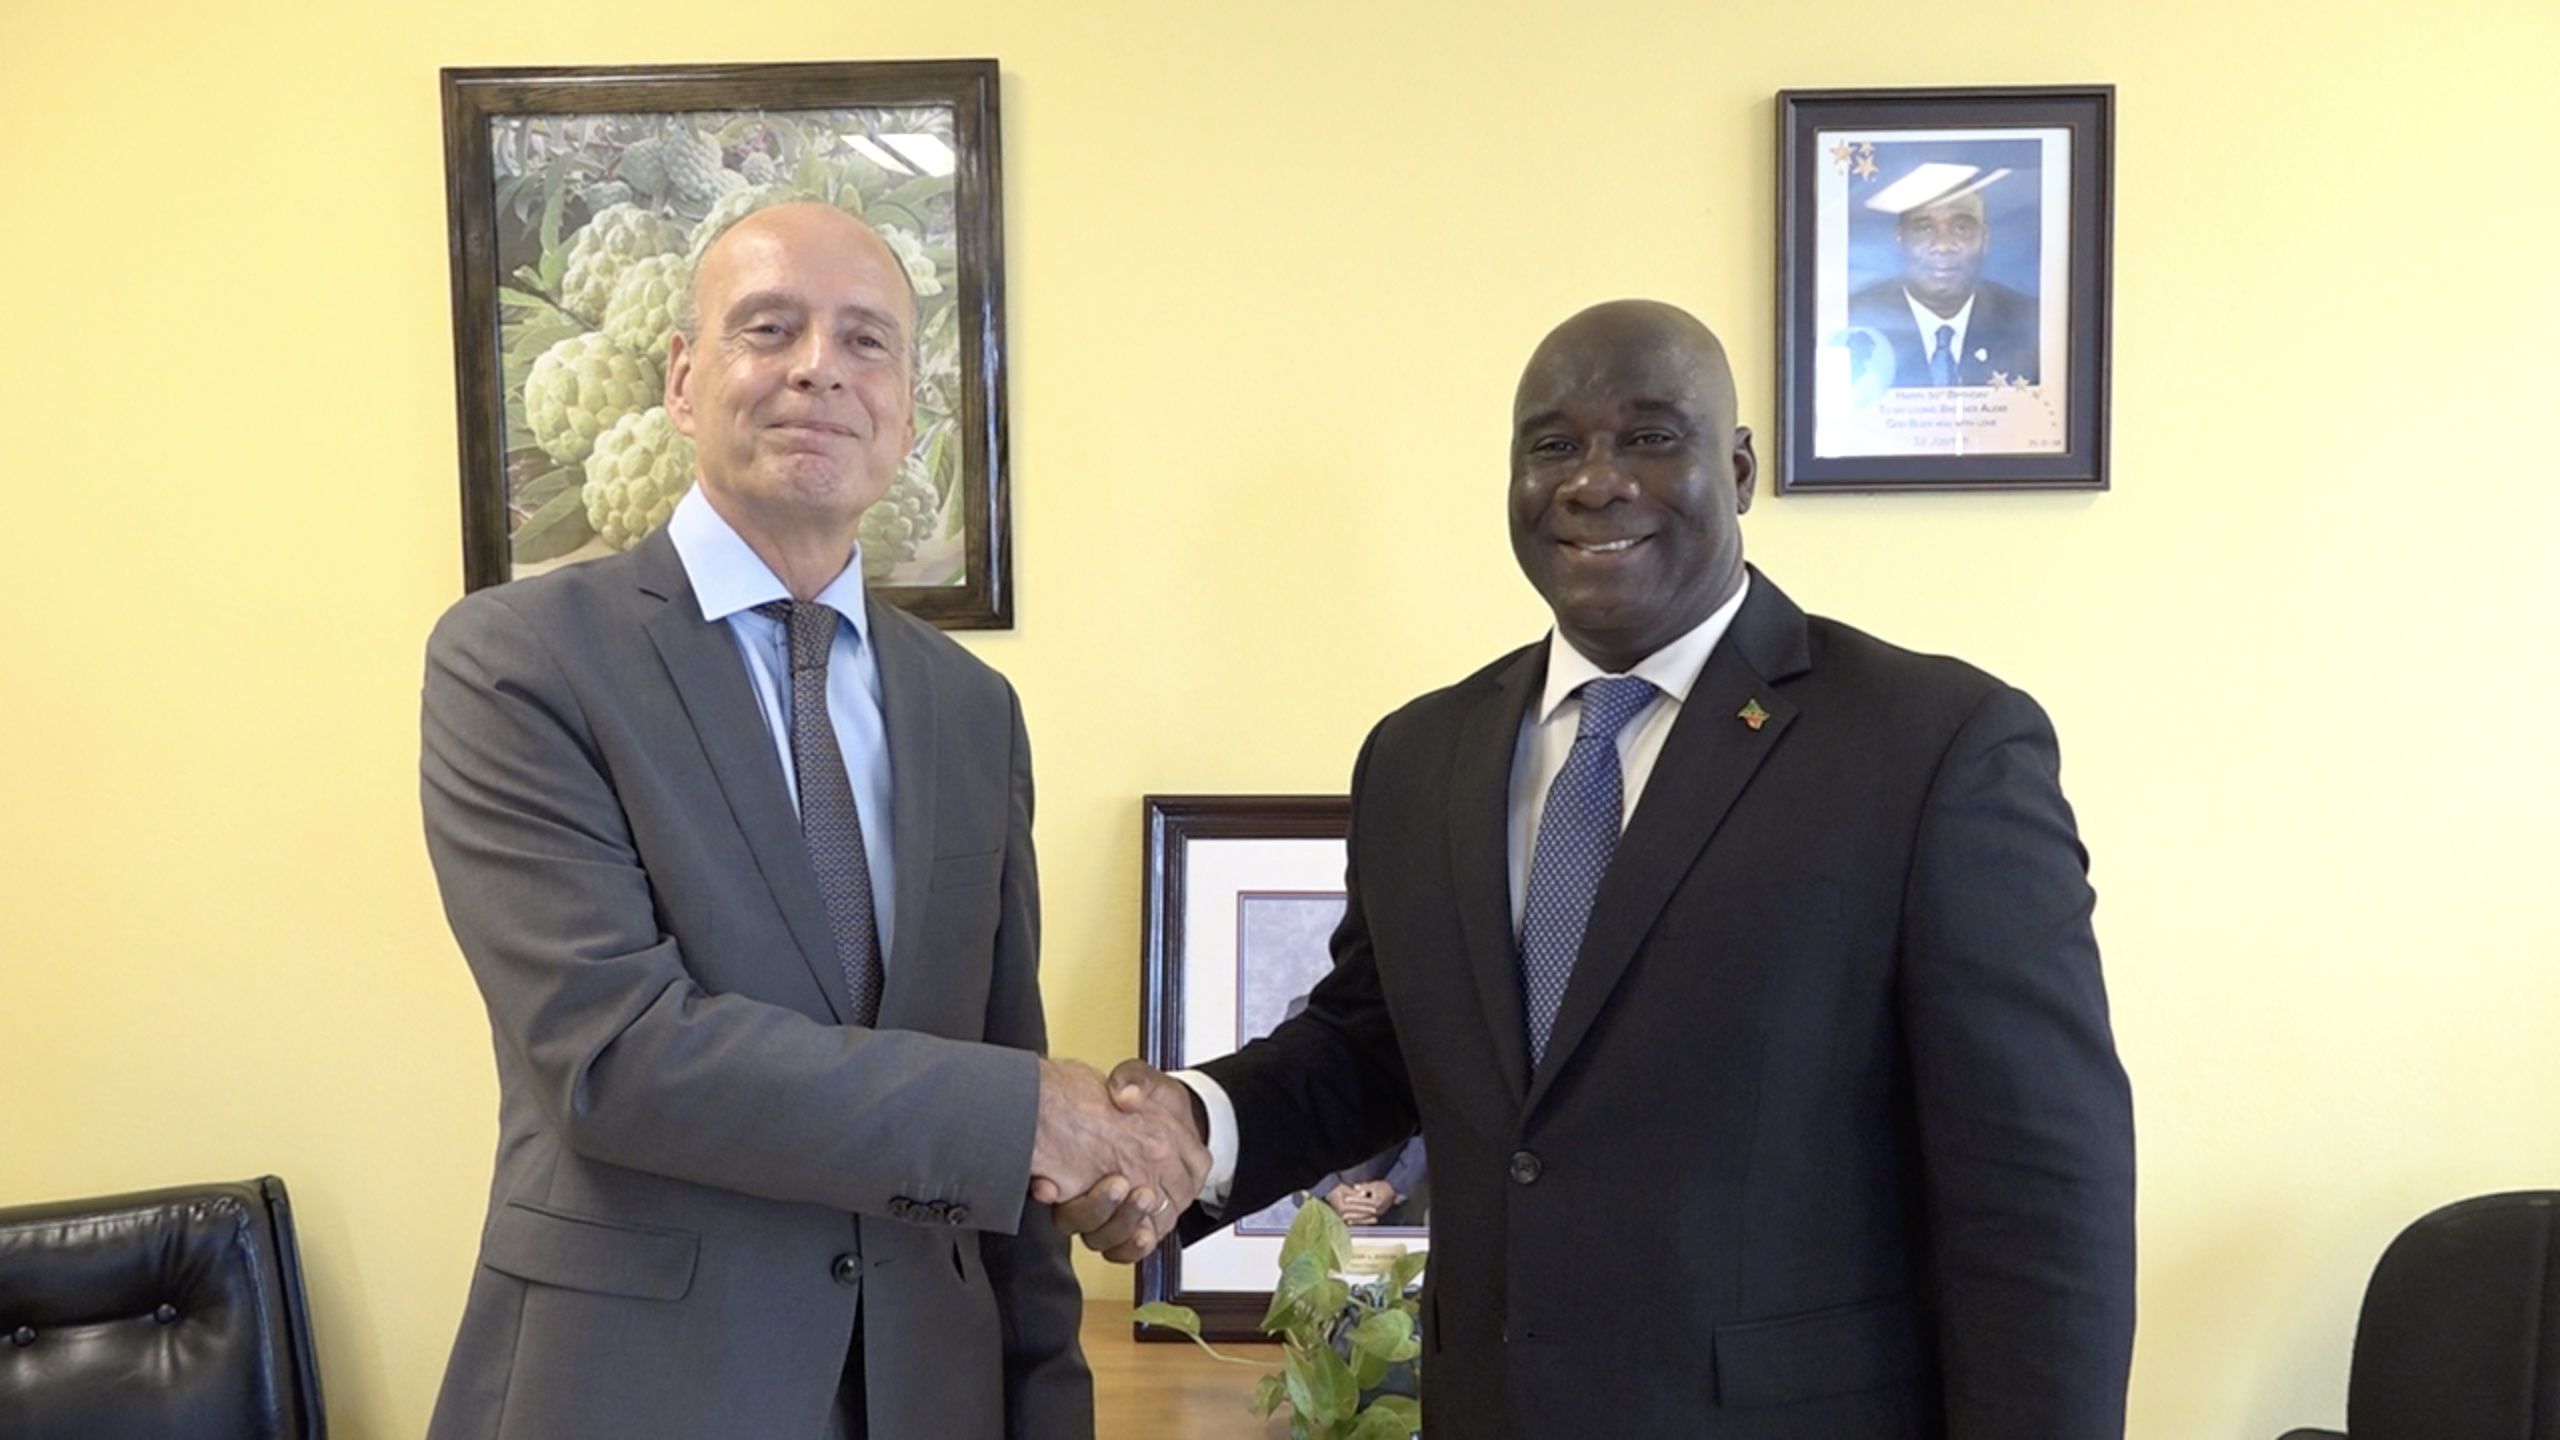 Hon. Alexis Jeffers, Acting Premier of Nevis (right) welcomes His Excellency Sandor Marnix Raphaël Varga van Kibéd en Makfalva, Ambassador of the United Kingdom of the Netherlands to St. Kitts and Nevis to his office at Pinney’s Estate during a courtesy call on September 08, 2022